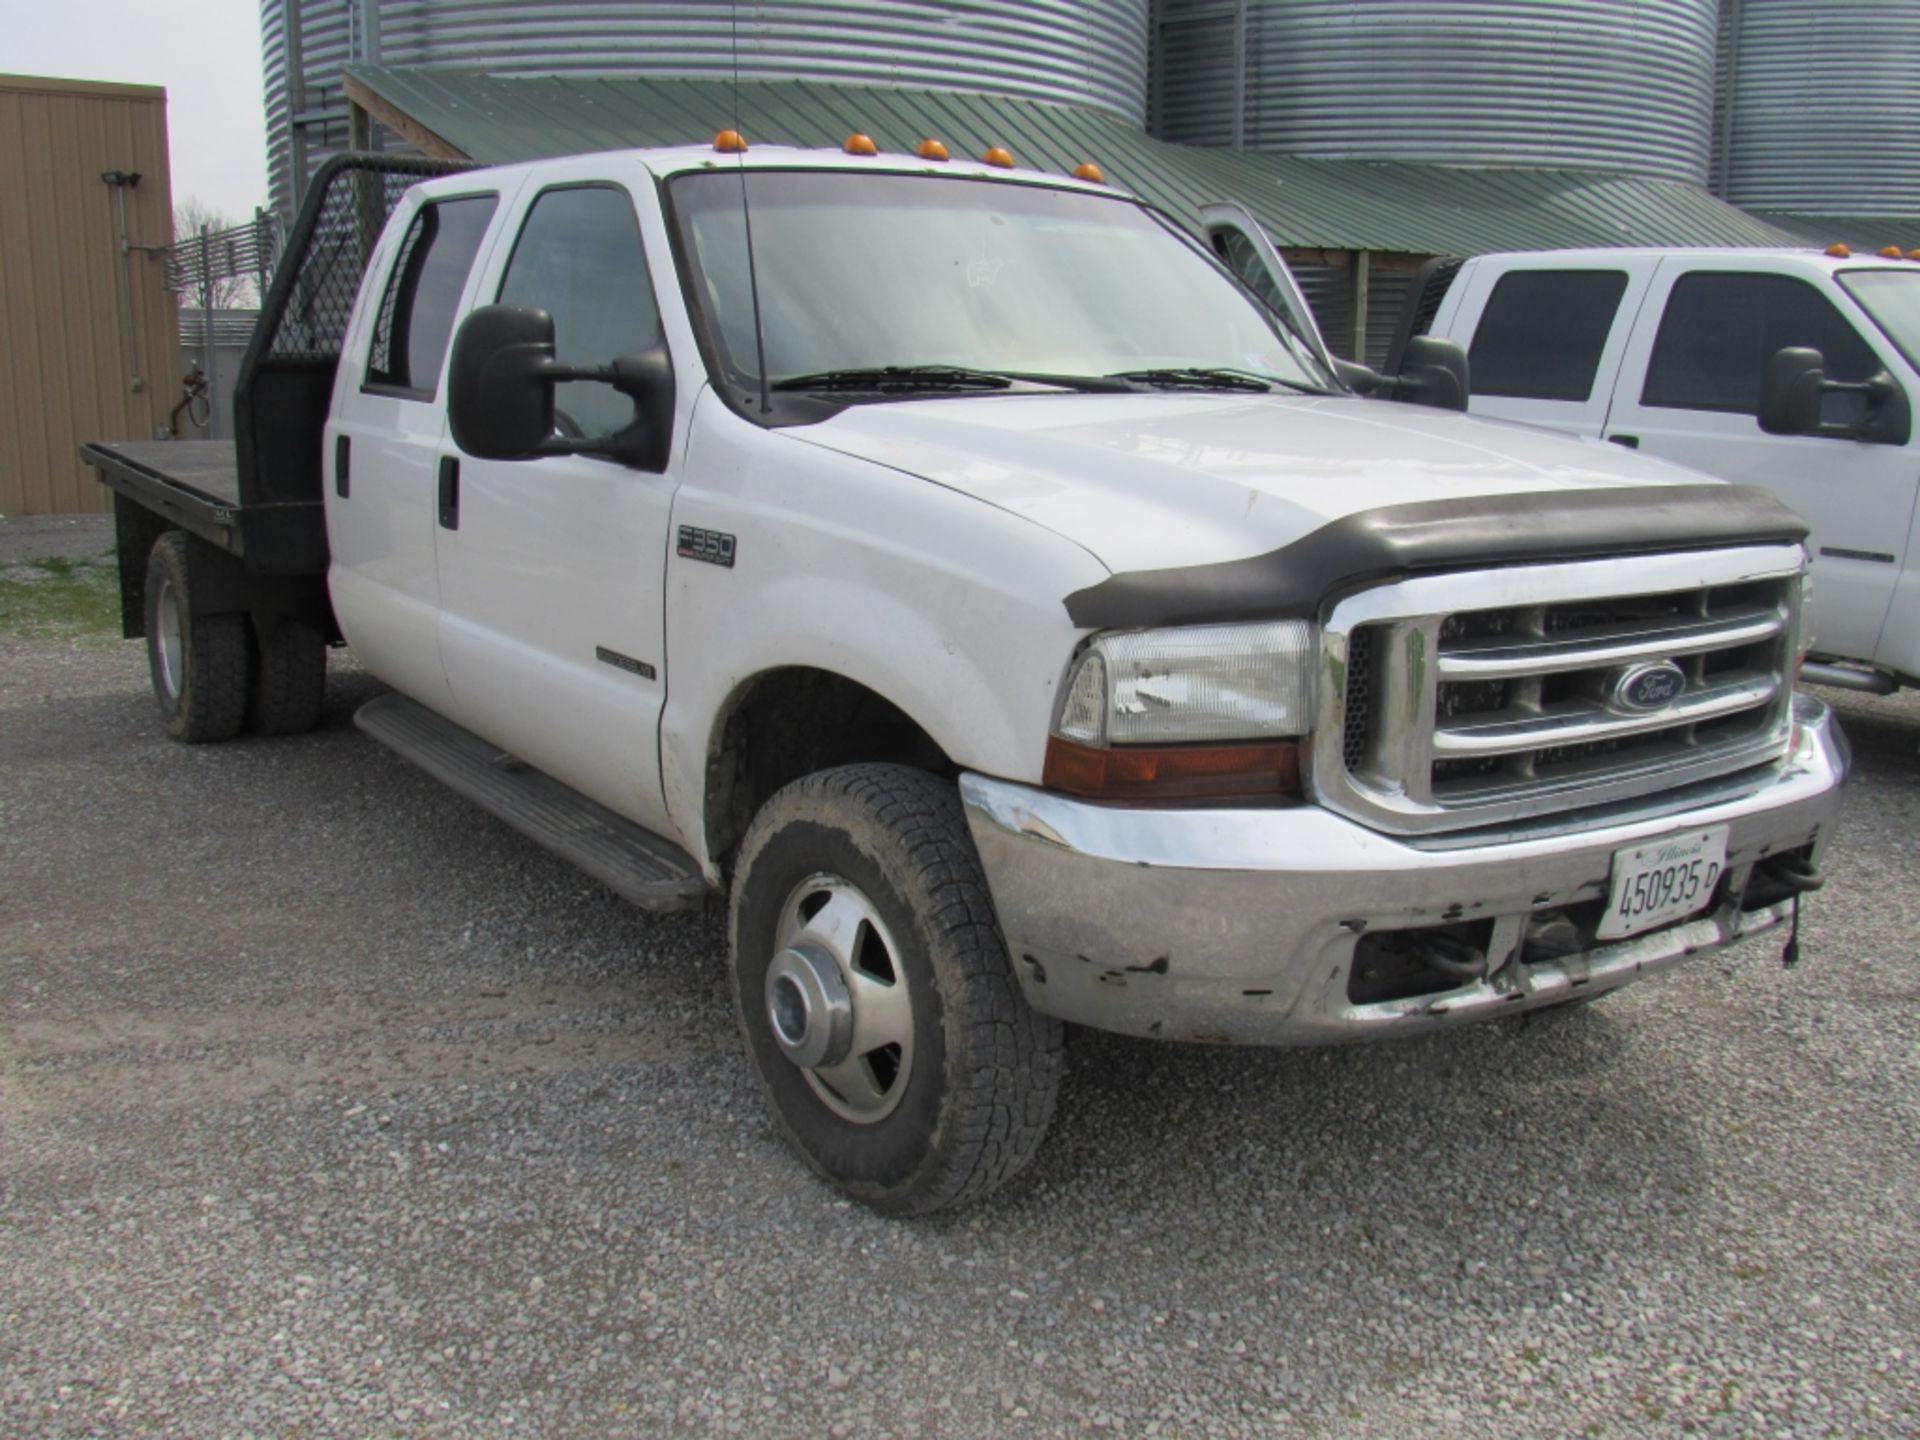 2001 Ford F350 Lariat Flatbed 4wd 7.3 L Powerstroke Diesel Engine - Image 9 of 21